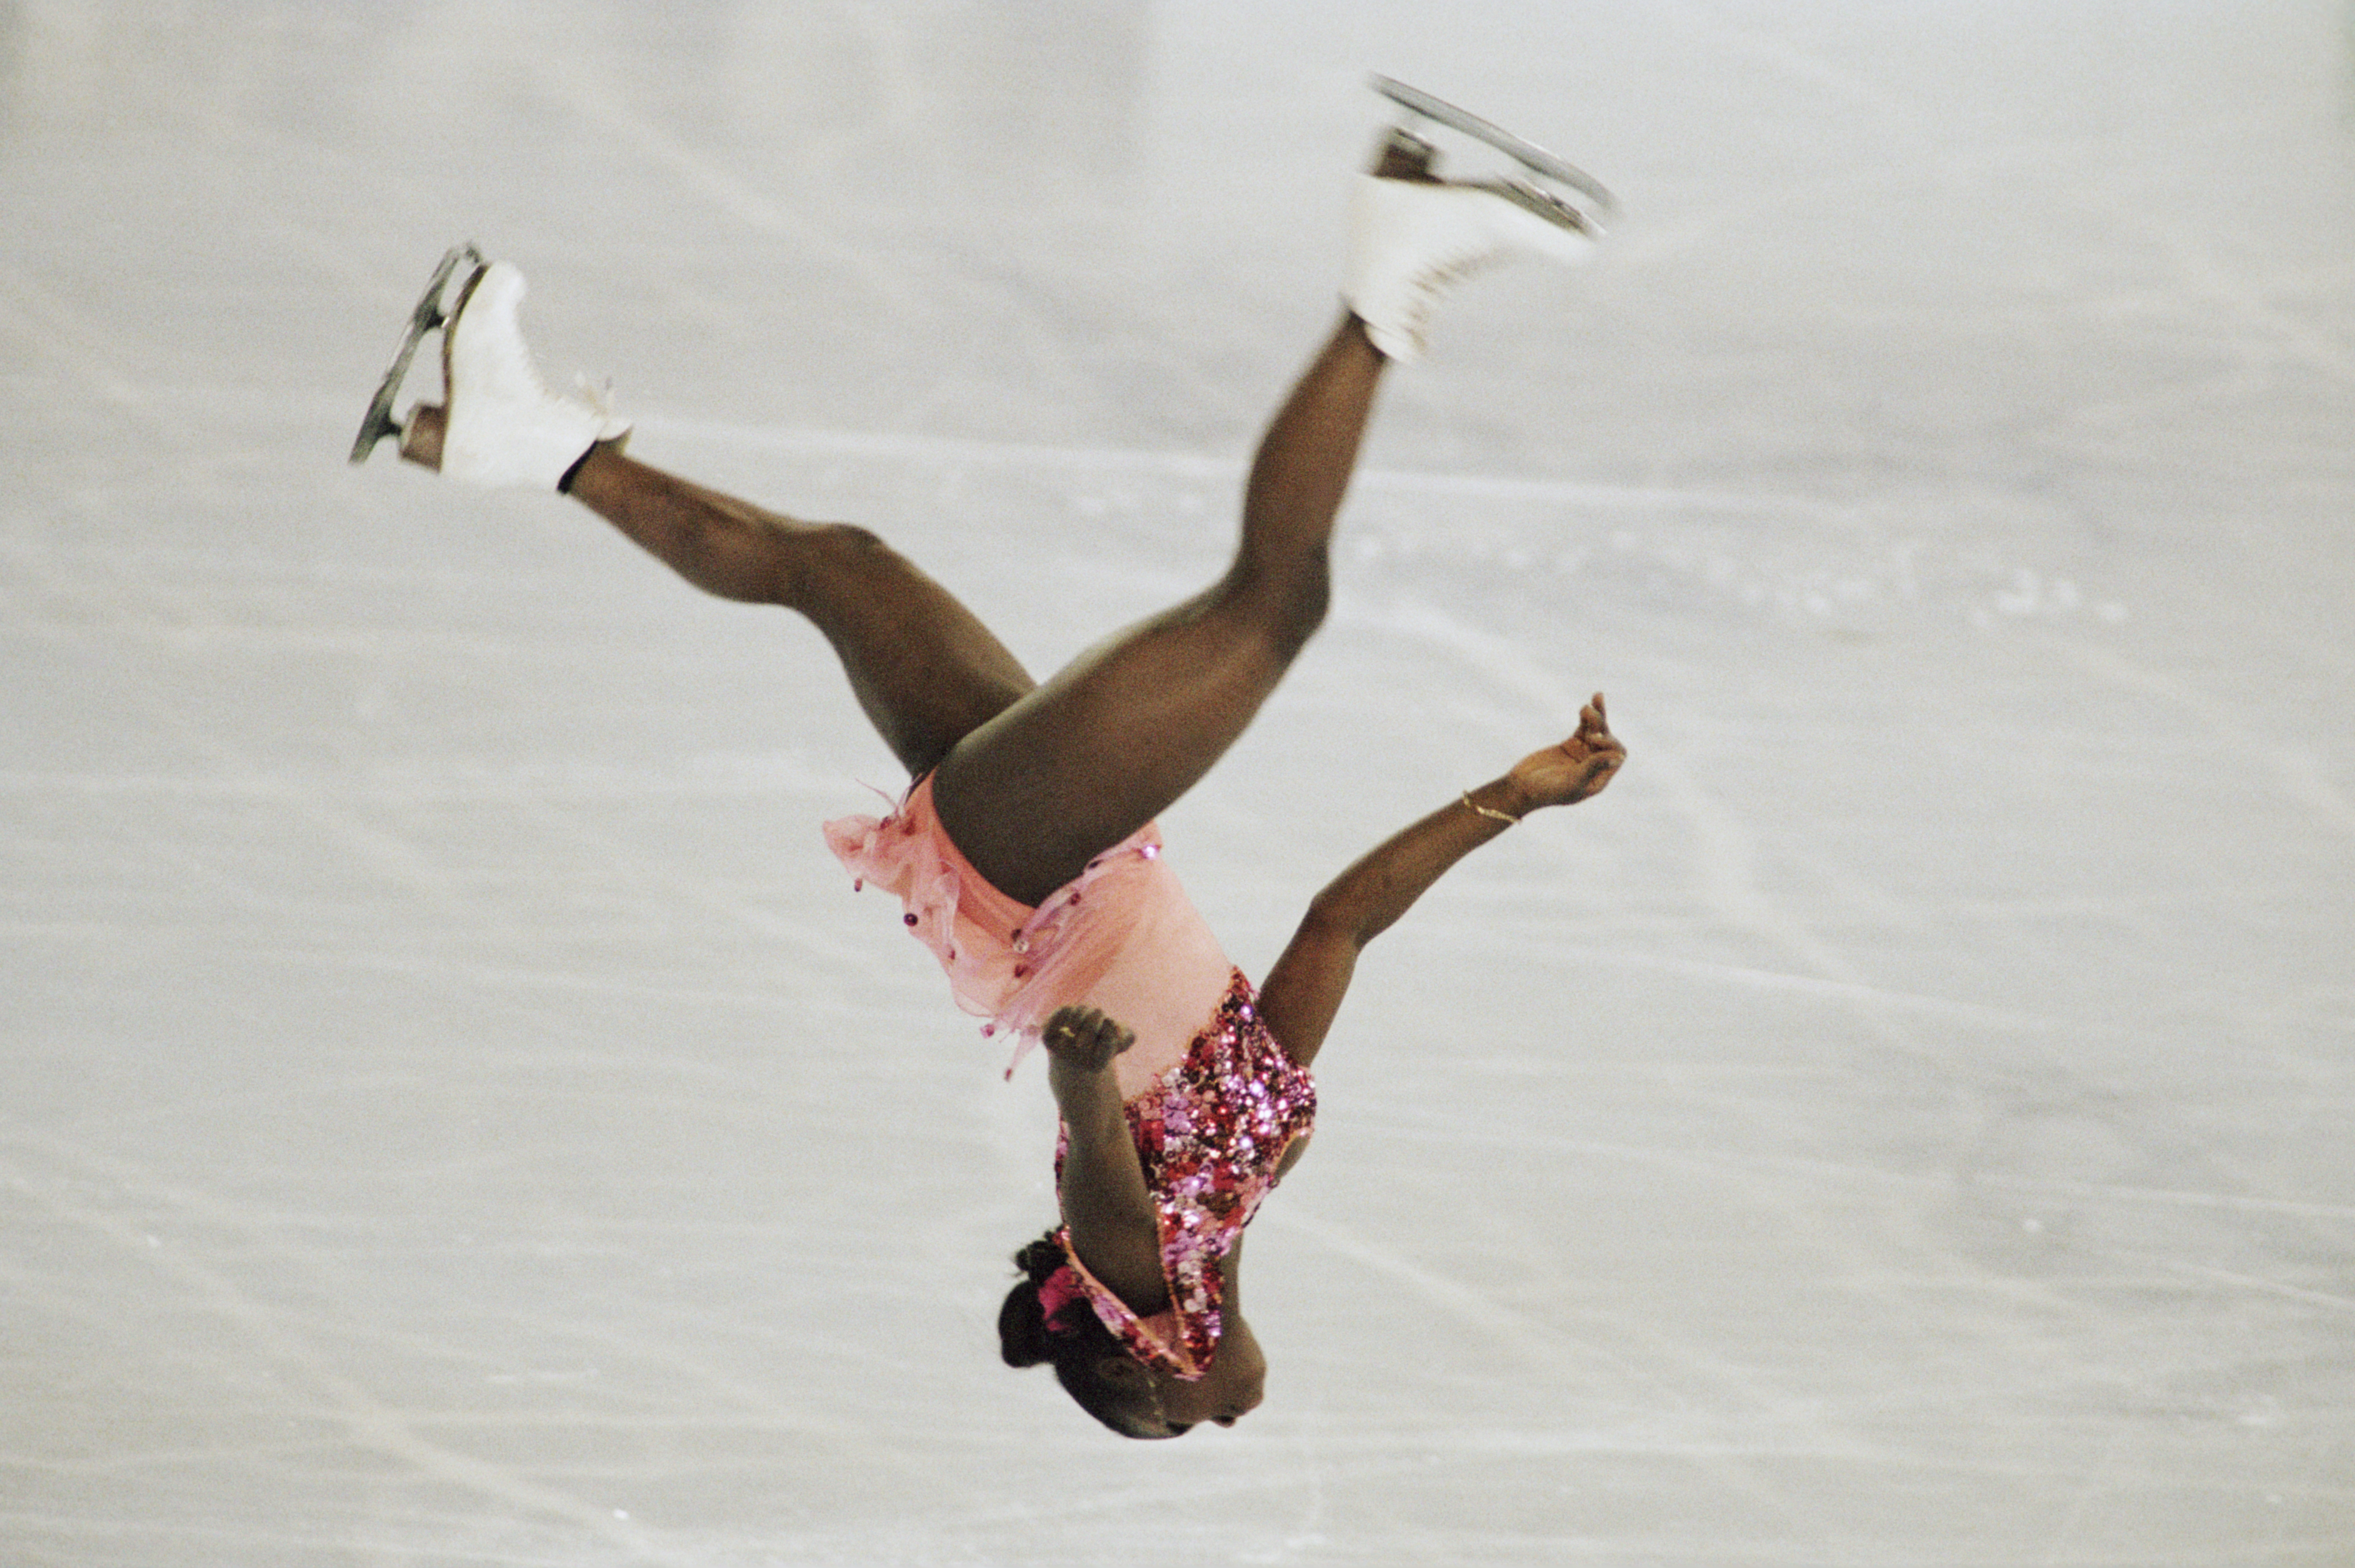 The Revolutionary Legacy of Surya Bonaly, a Back-Flipping Figure Skater